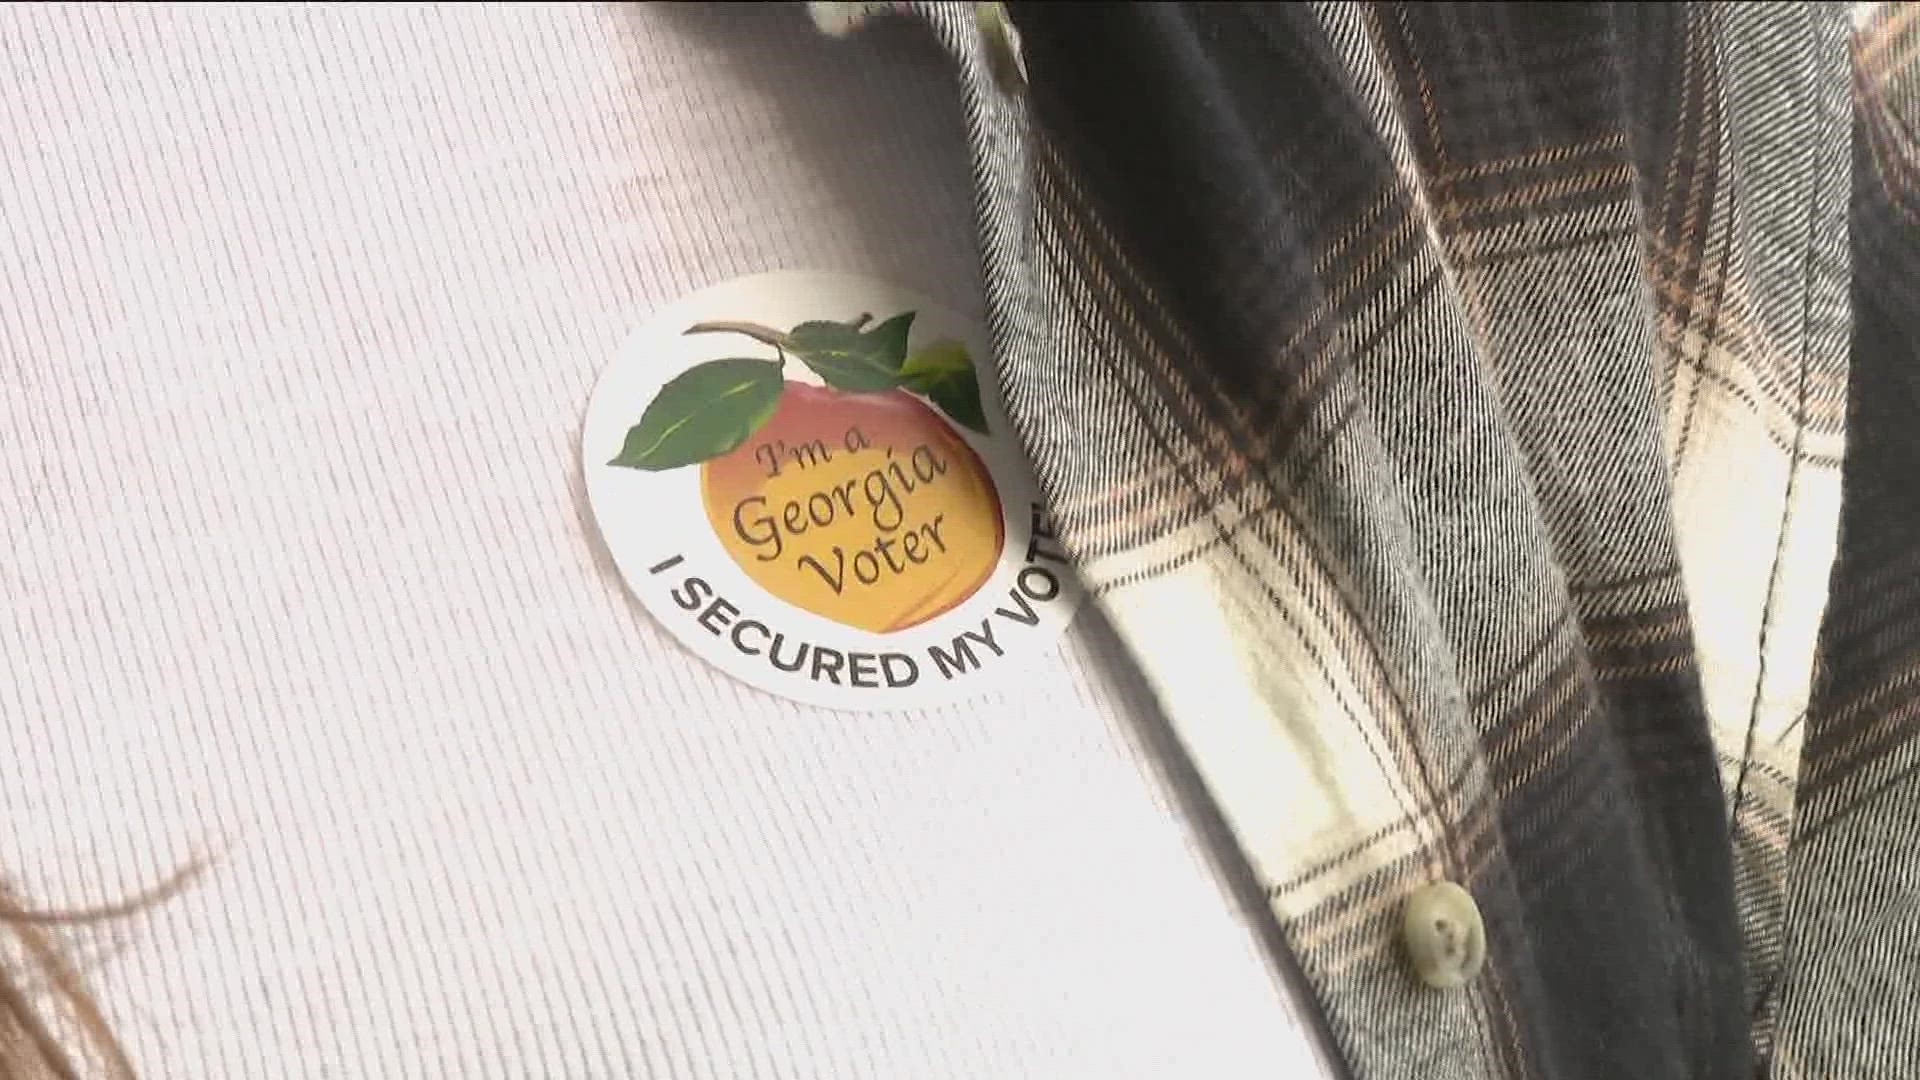 Peach State voters have gone to the polls in record numbers during the early voting period.